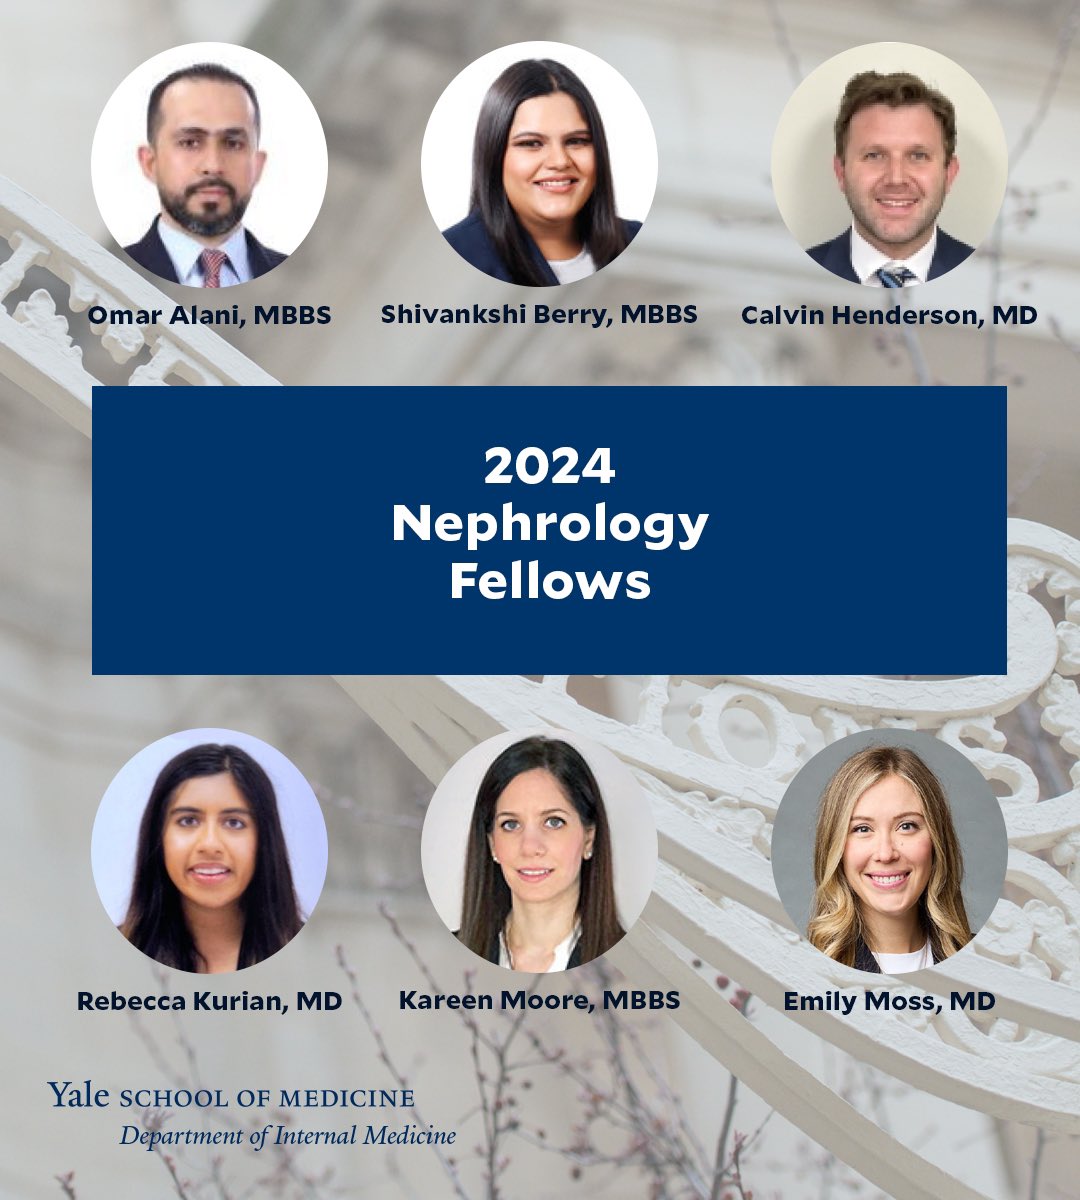 Congratulations to our just-matched fellowship class beginning in 2024! 🎉 We are already so excited to have you here with us next summer! 🫘🫘 @YaleIMed #FellowshipMatch #MatchDay #Nephrology